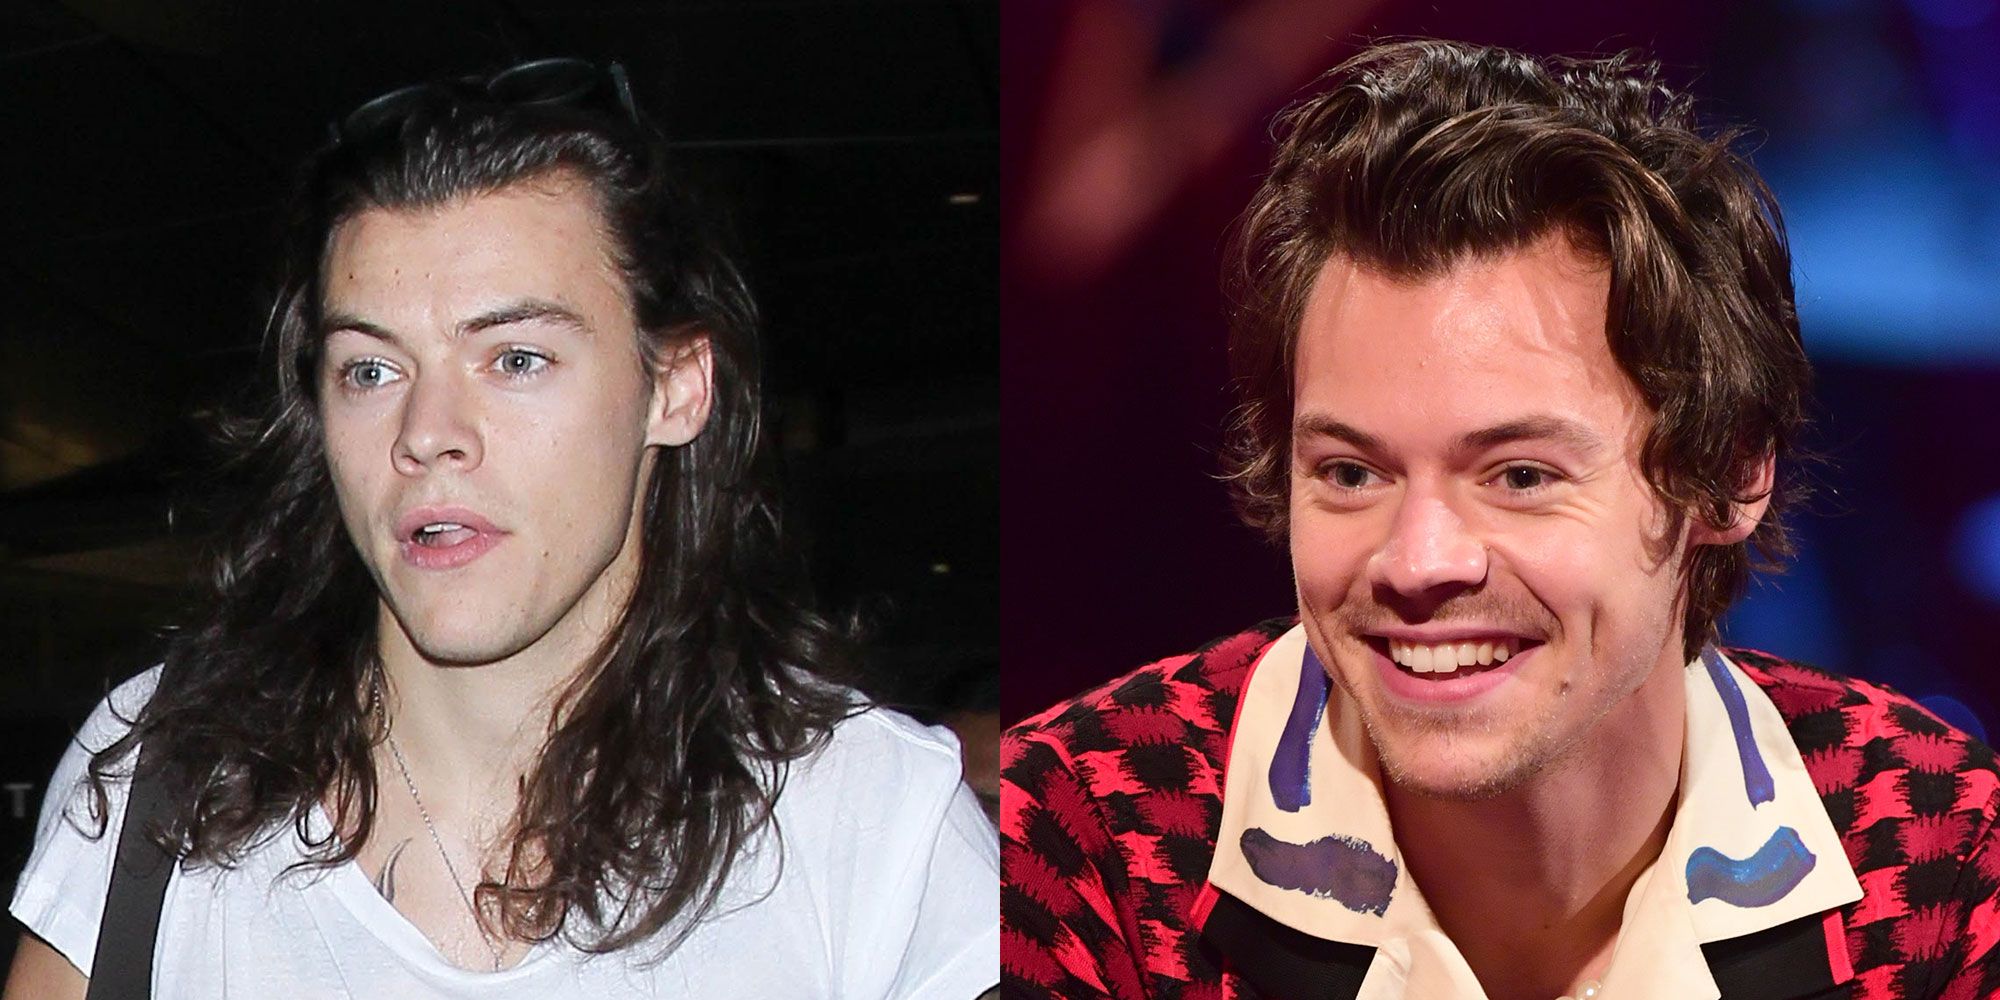 Harry Styles Hair Journey: His Best Long and Short Hairstyles